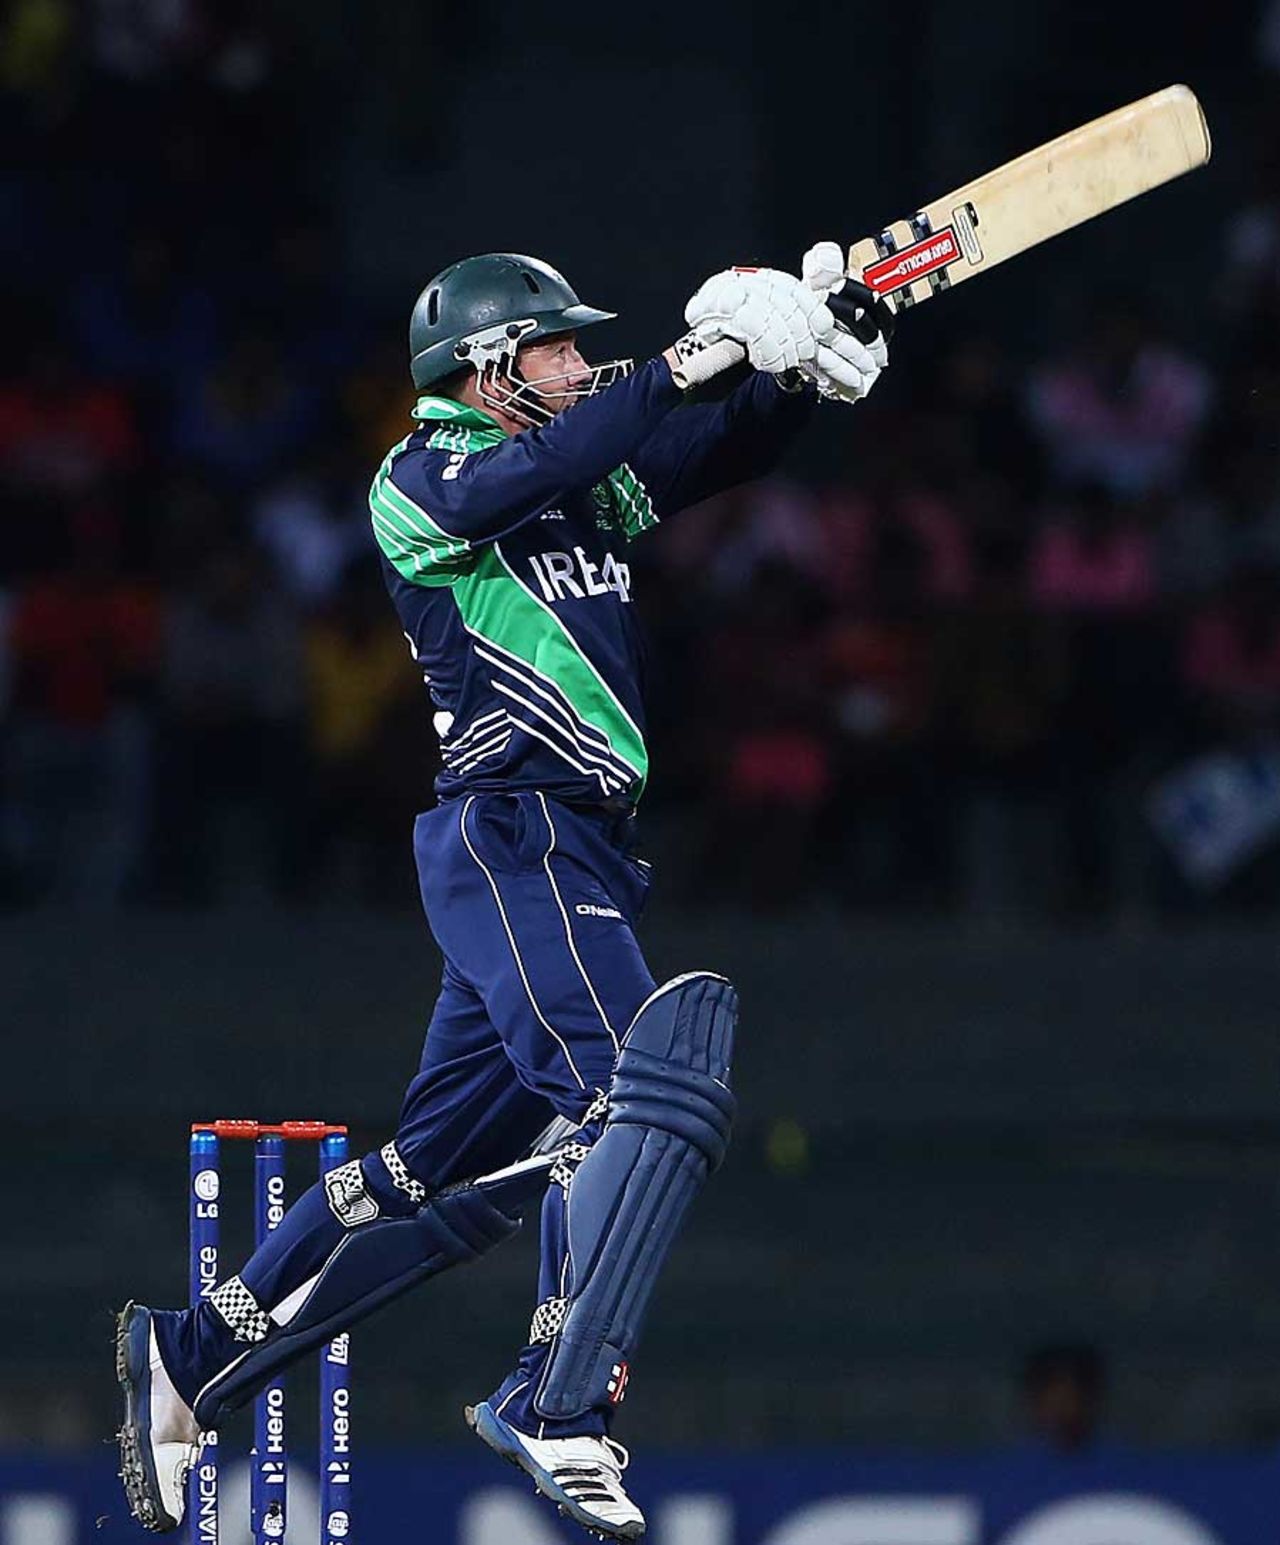 Niall O'Brien cuts over point, Ireland v West Indies, World Twenty20, Group B, Colombo, September 24, 2012